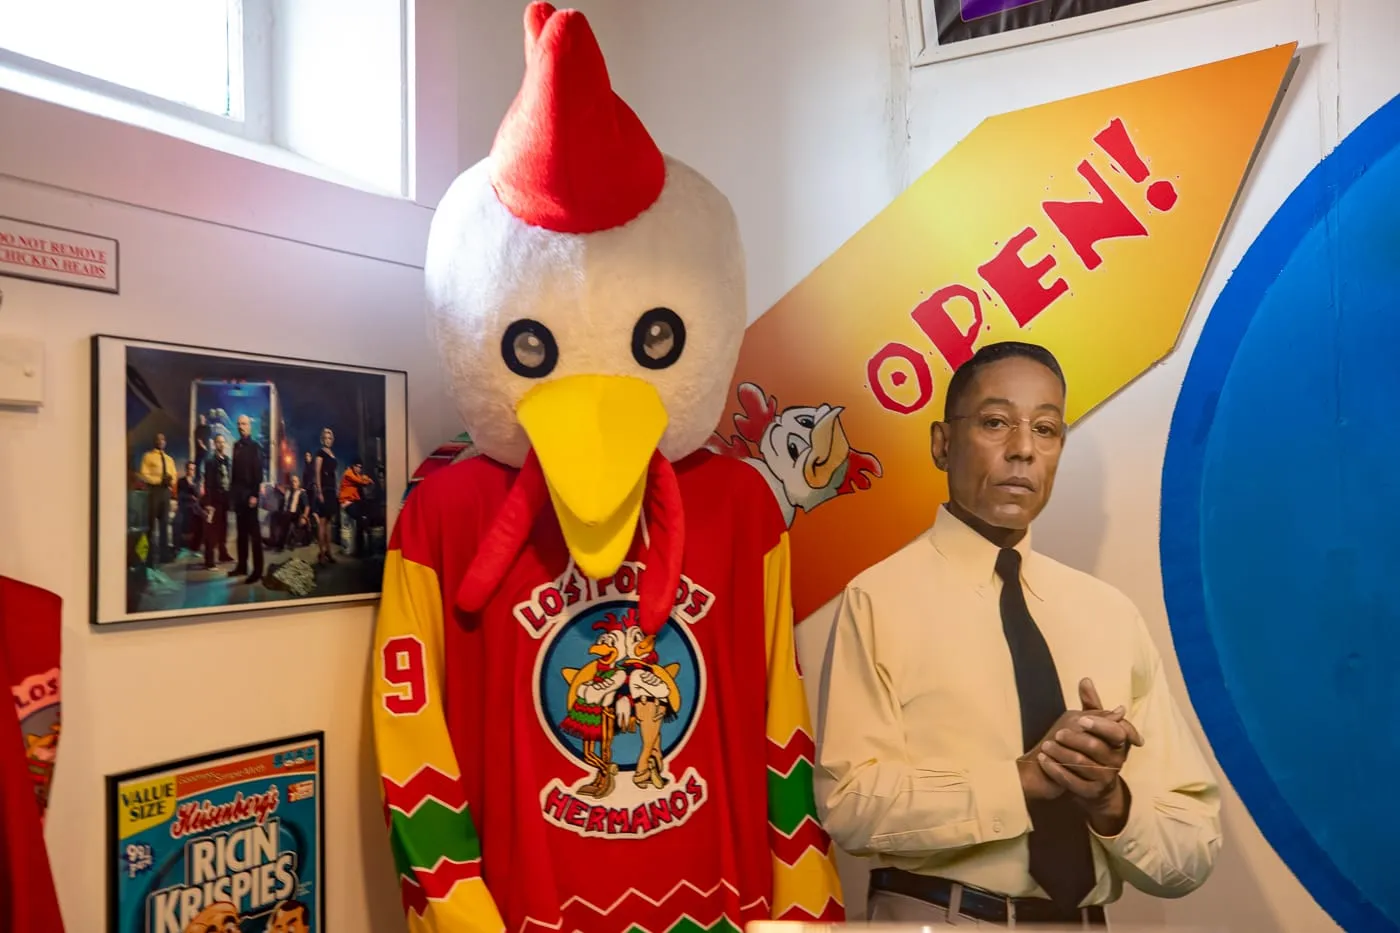 Los Pollos Hermanos fast food Photo Op at the Breaking Bad Store & Museum in Albuquerque, New Mexico